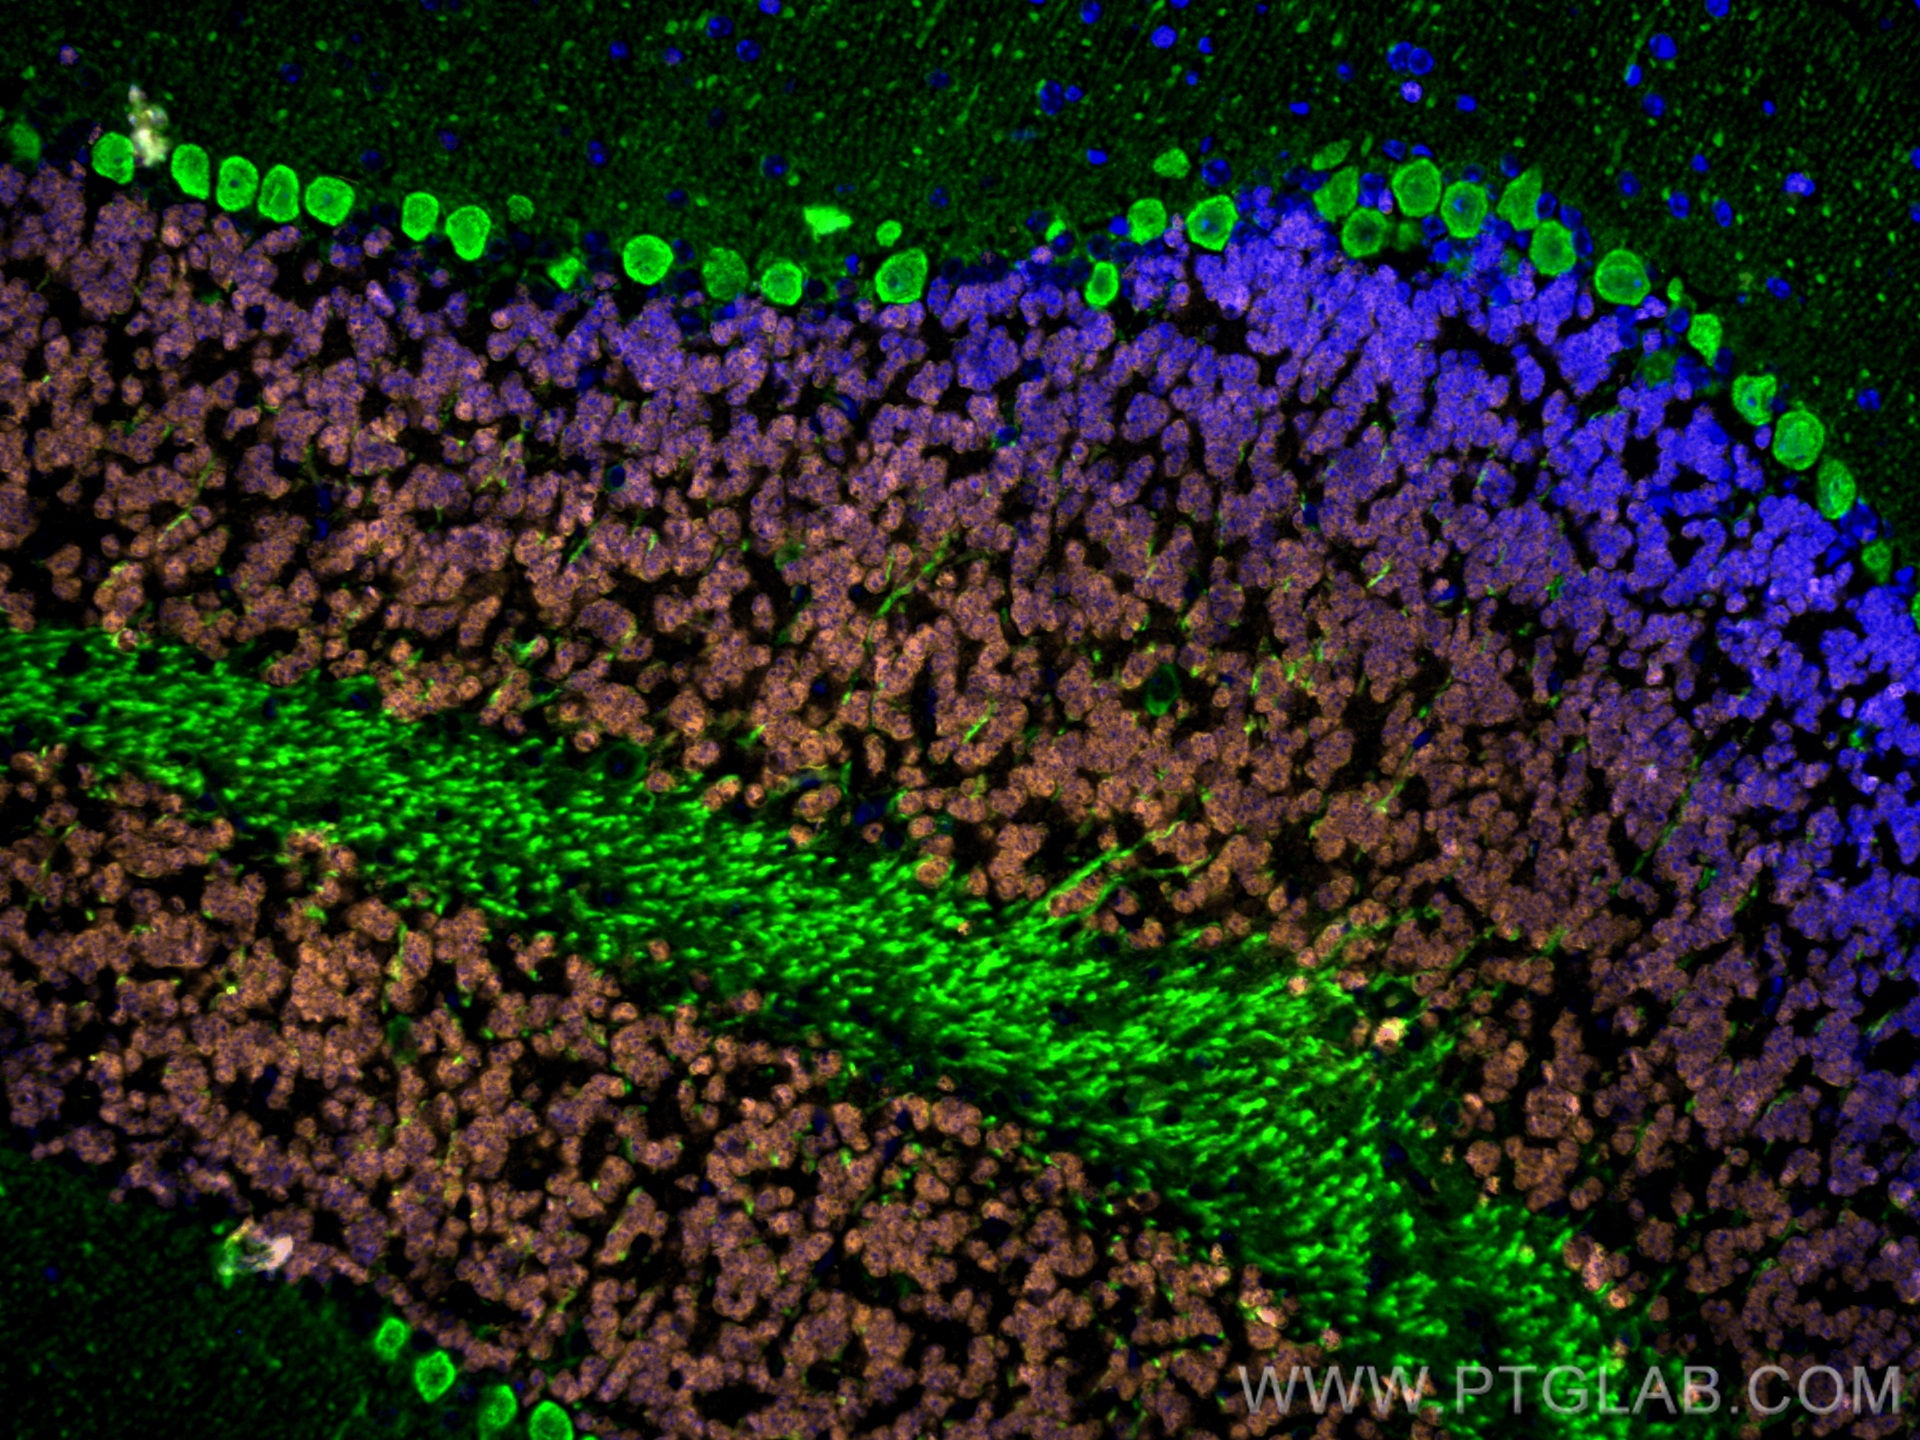 Immunofluorescence of mouse cerebellum: mouse cerebellum FFPE section was stained with Rabbit anti-NeuN polyclonal antibody (26975-1-AP, 1:200, orange) and mouse anti-Calbindin-D28k monoclonal antibody (66394-1-Ig, 1:200, green). Multi-rAb CoraLite® Plus 555 conjugated Recombinant Goat anti-rabbit secondary antibody (RGAR003, 1:500) and Multi-rAb CoraLite® Plus 488 conjugated Goat Anti-Mouse Recombinant Secondary Antibody (H+L) were used for detection (RGAM002, 1:500) .